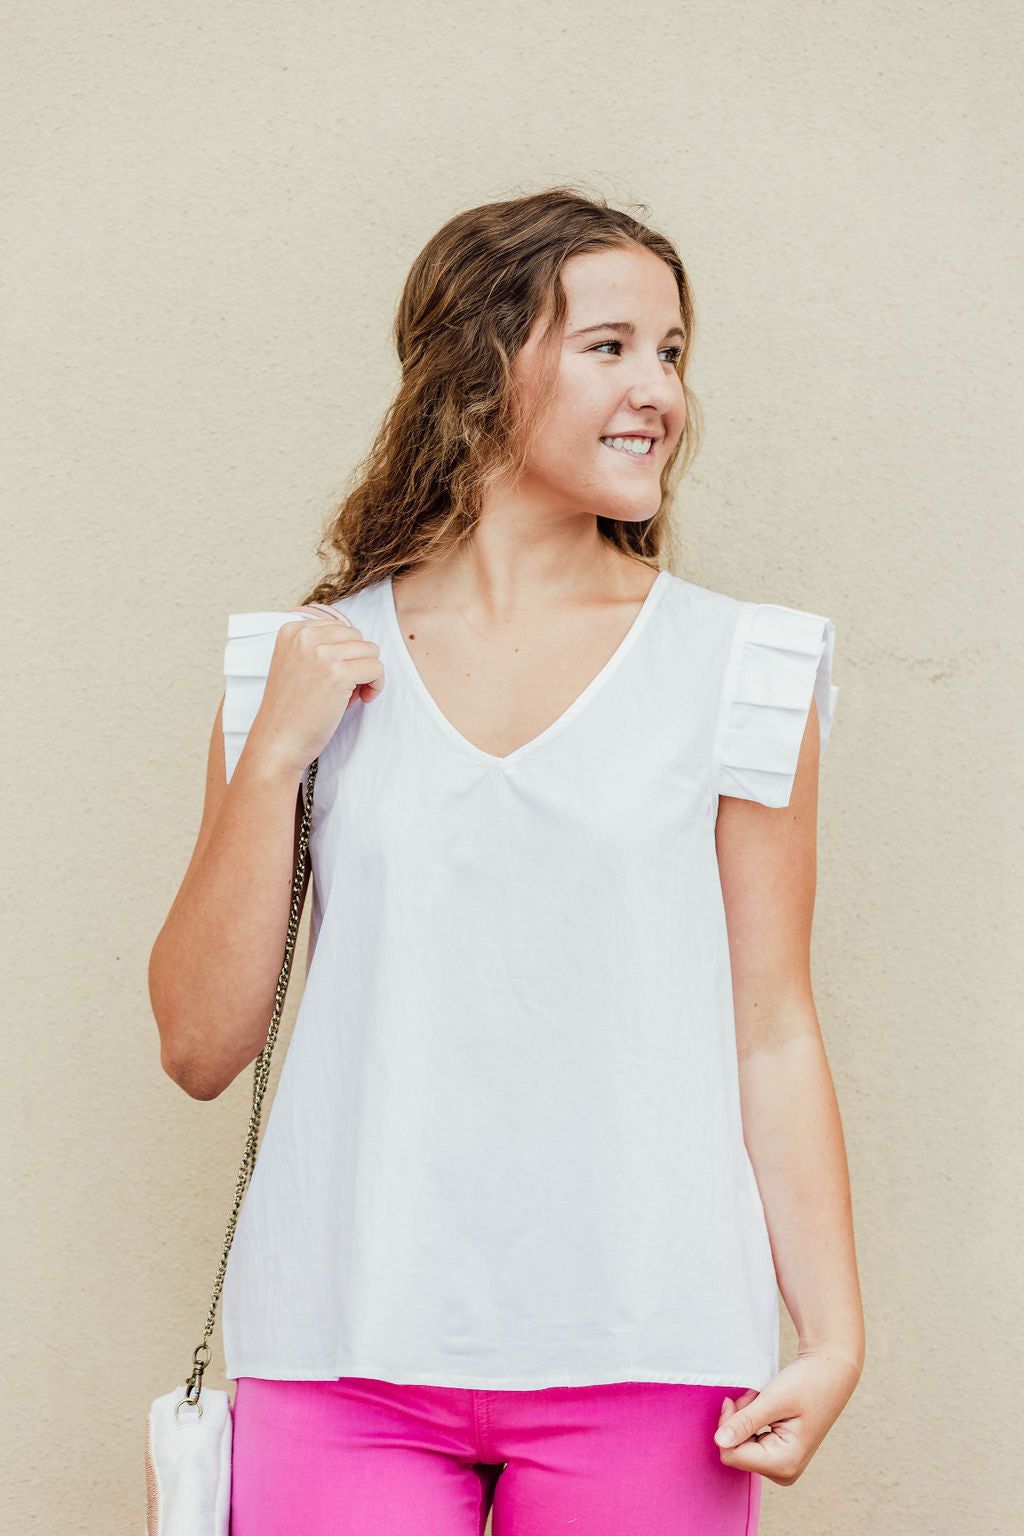 How to Wear White Ruffle Top